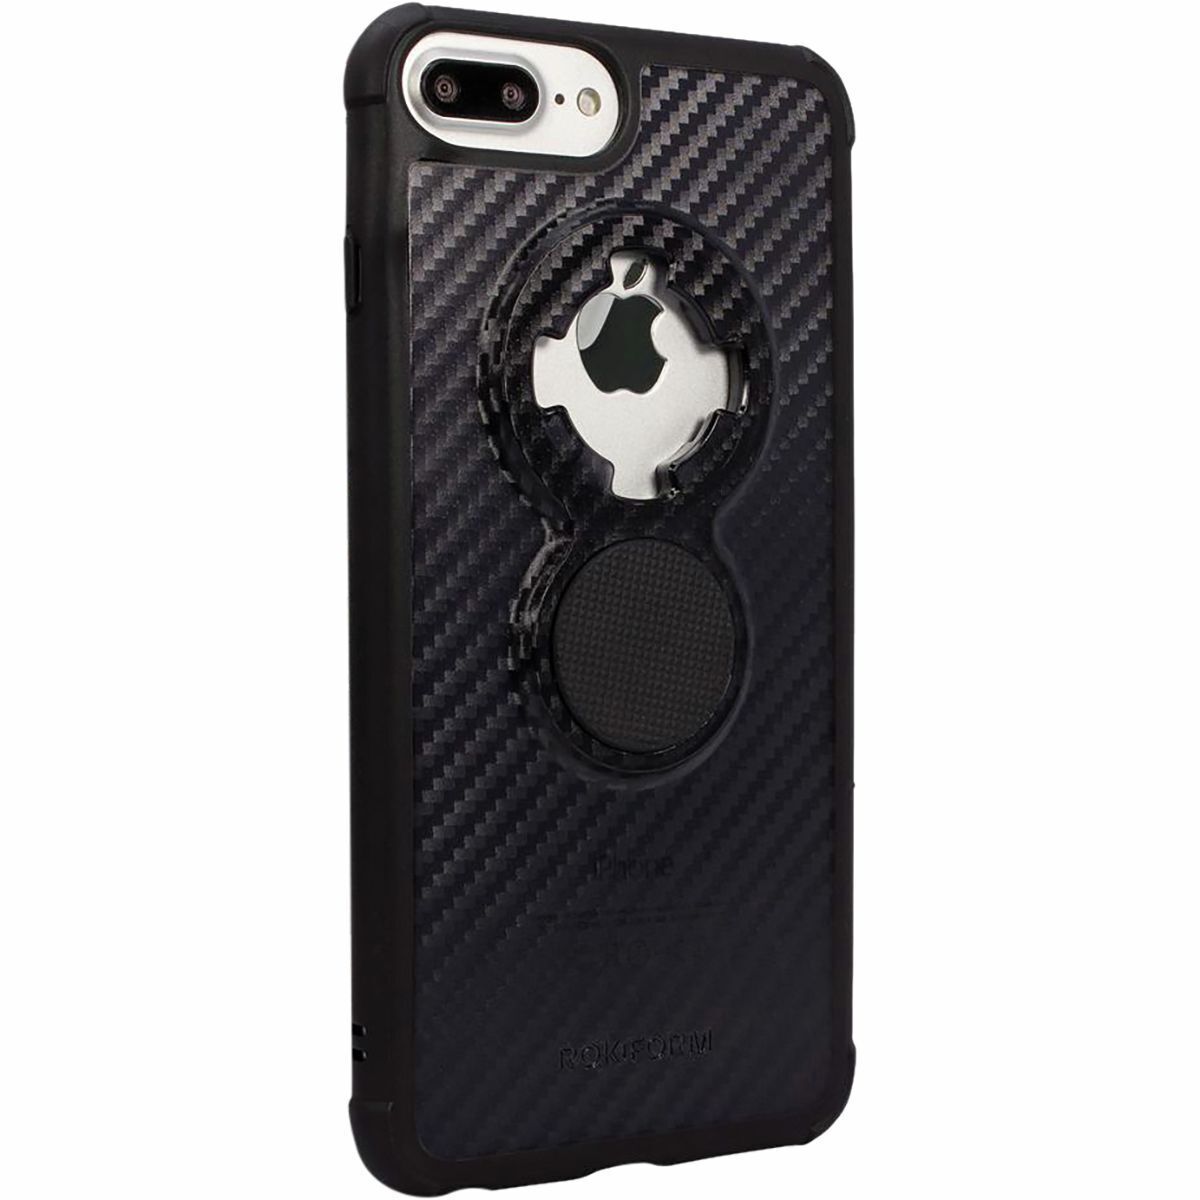 Rokform Crystal Case for iPhone